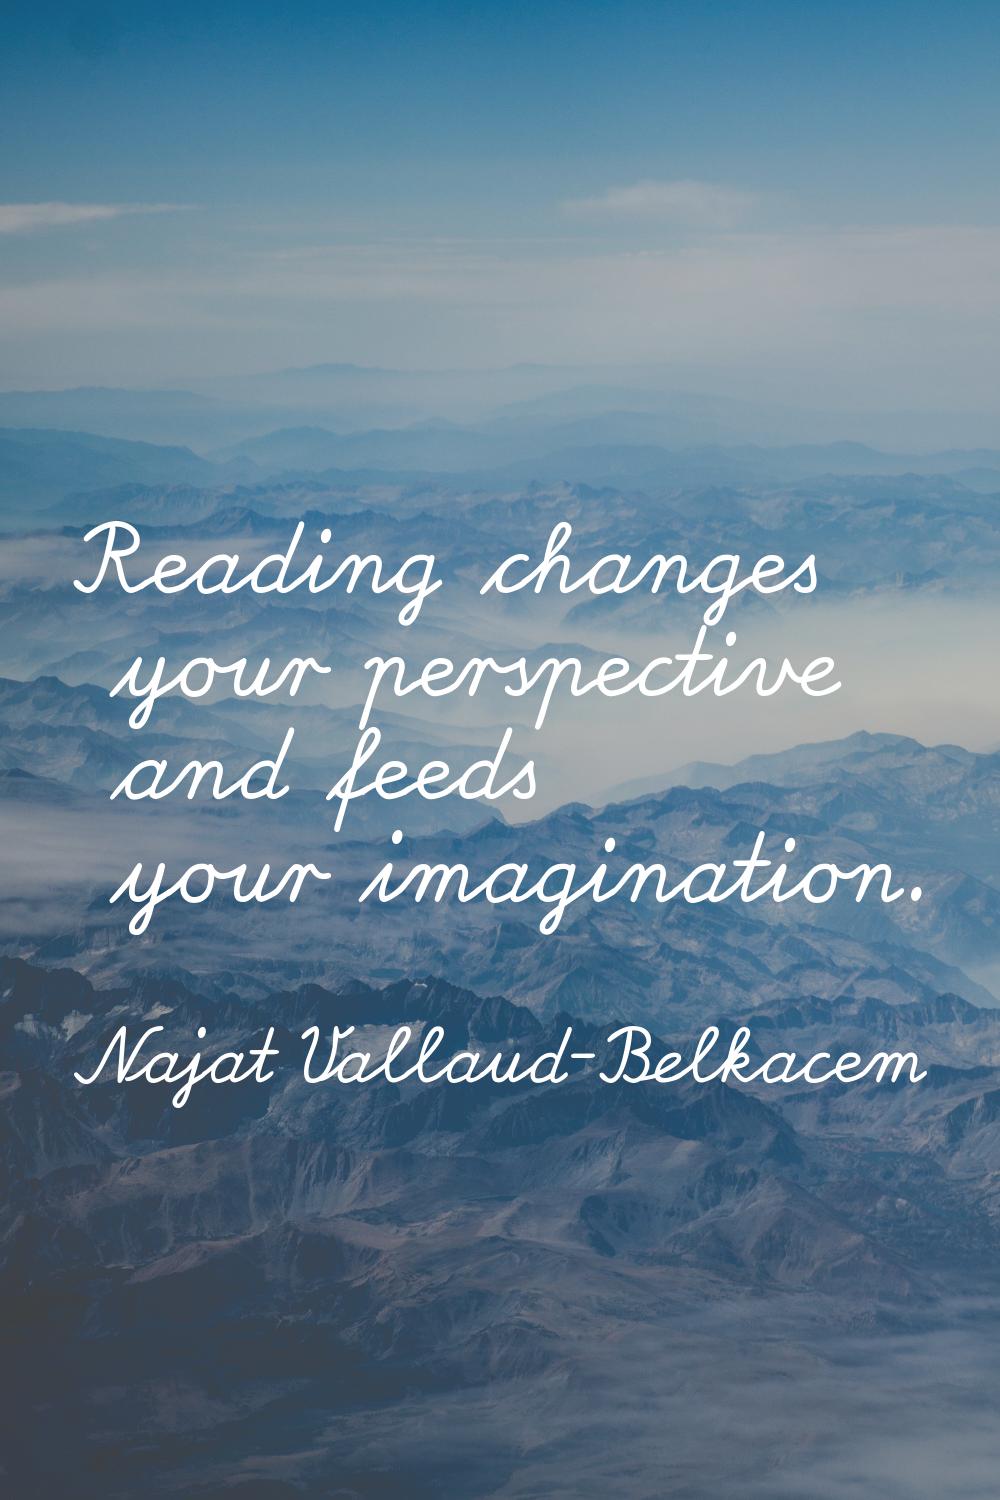 Reading changes your perspective and feeds your imagination.